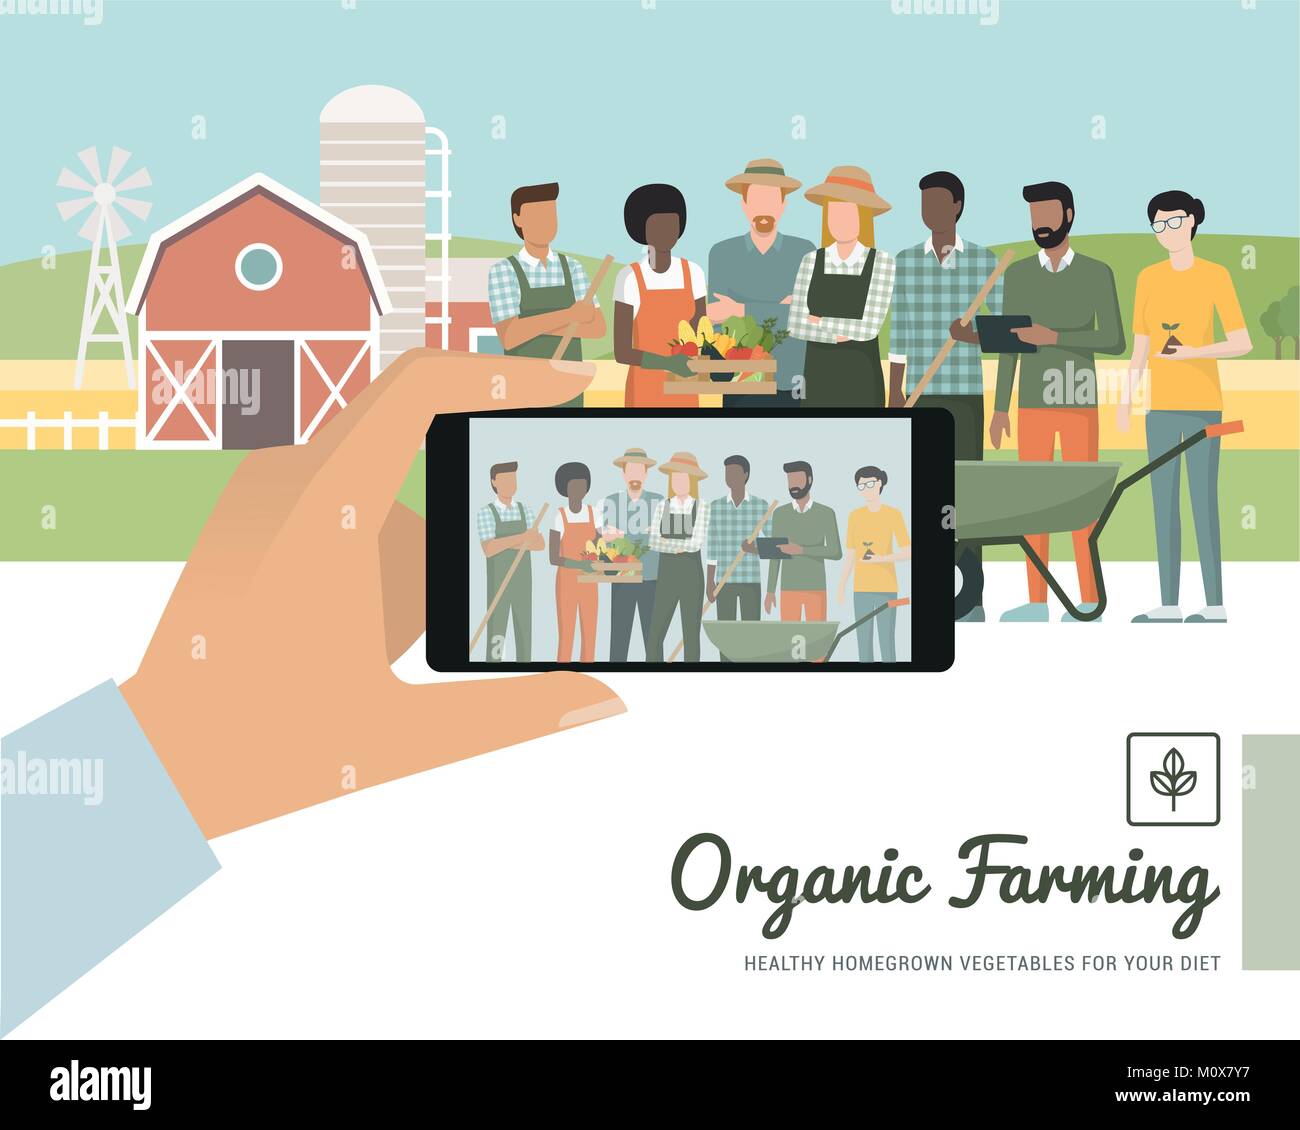 Multi-ethic group of farmers posing together at the farm, a man is taking a portrait using a smartphone, subjective point of view Stock Vector